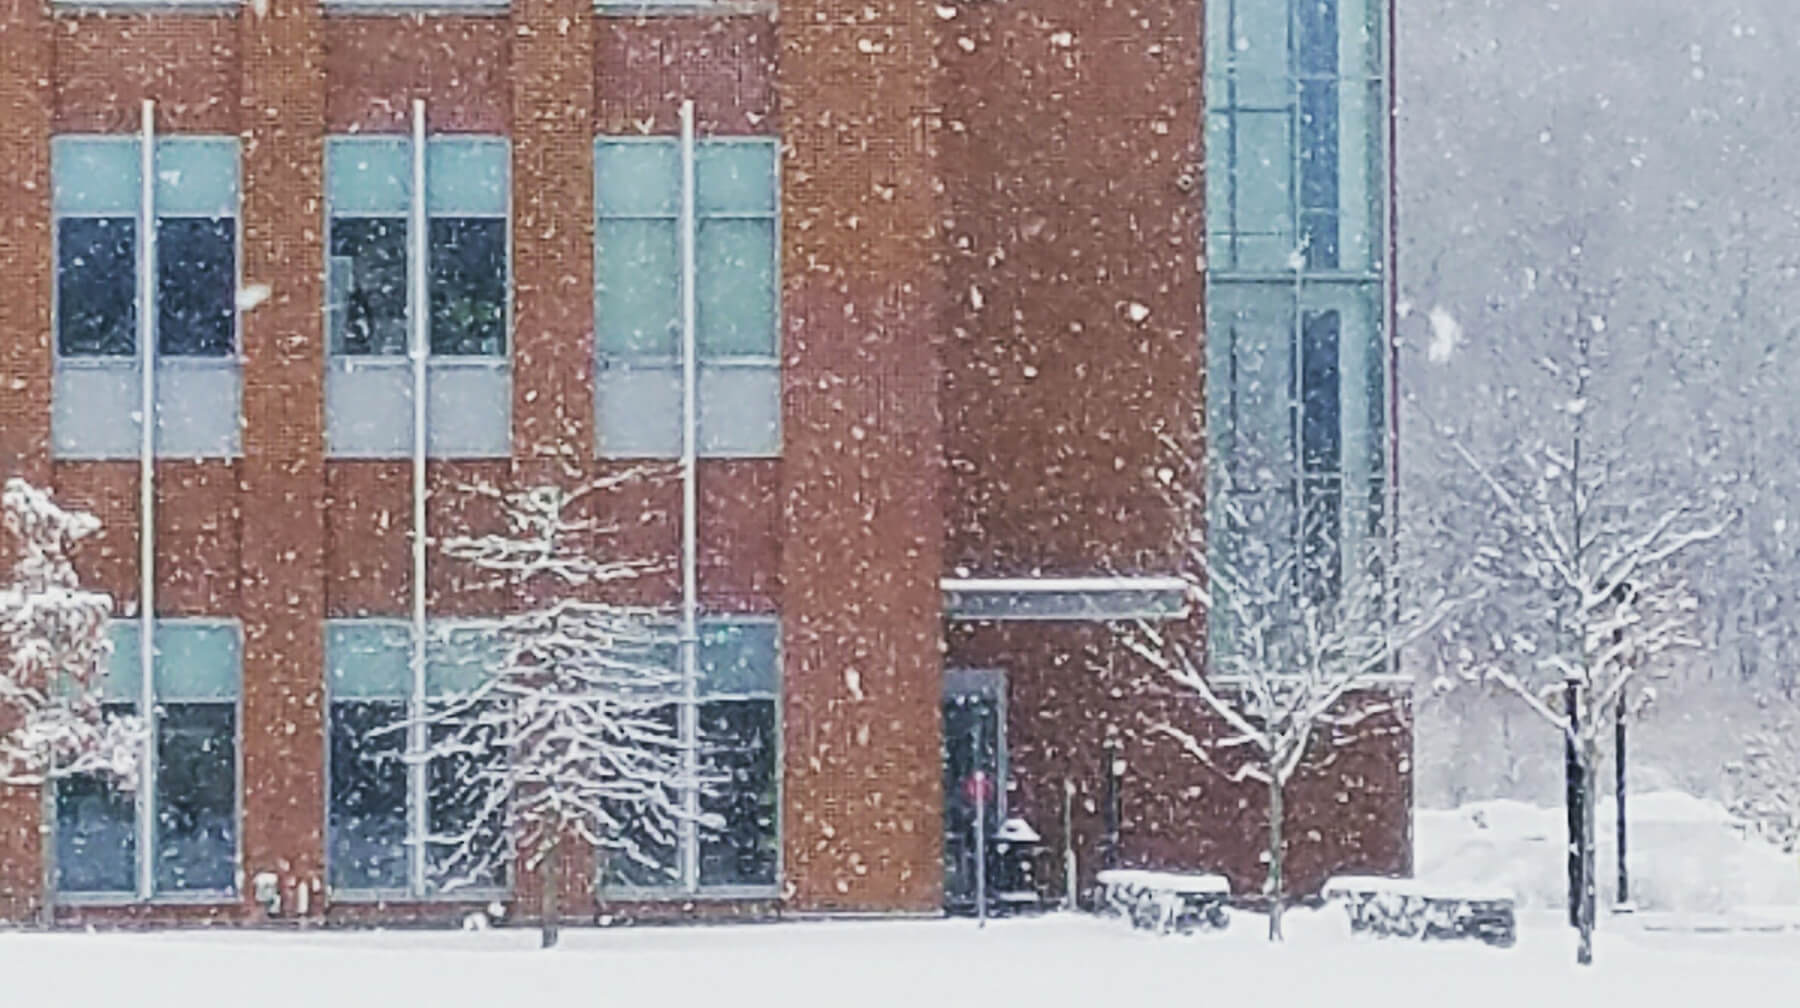 Winter Session at Three Rivers Campus in the Snow